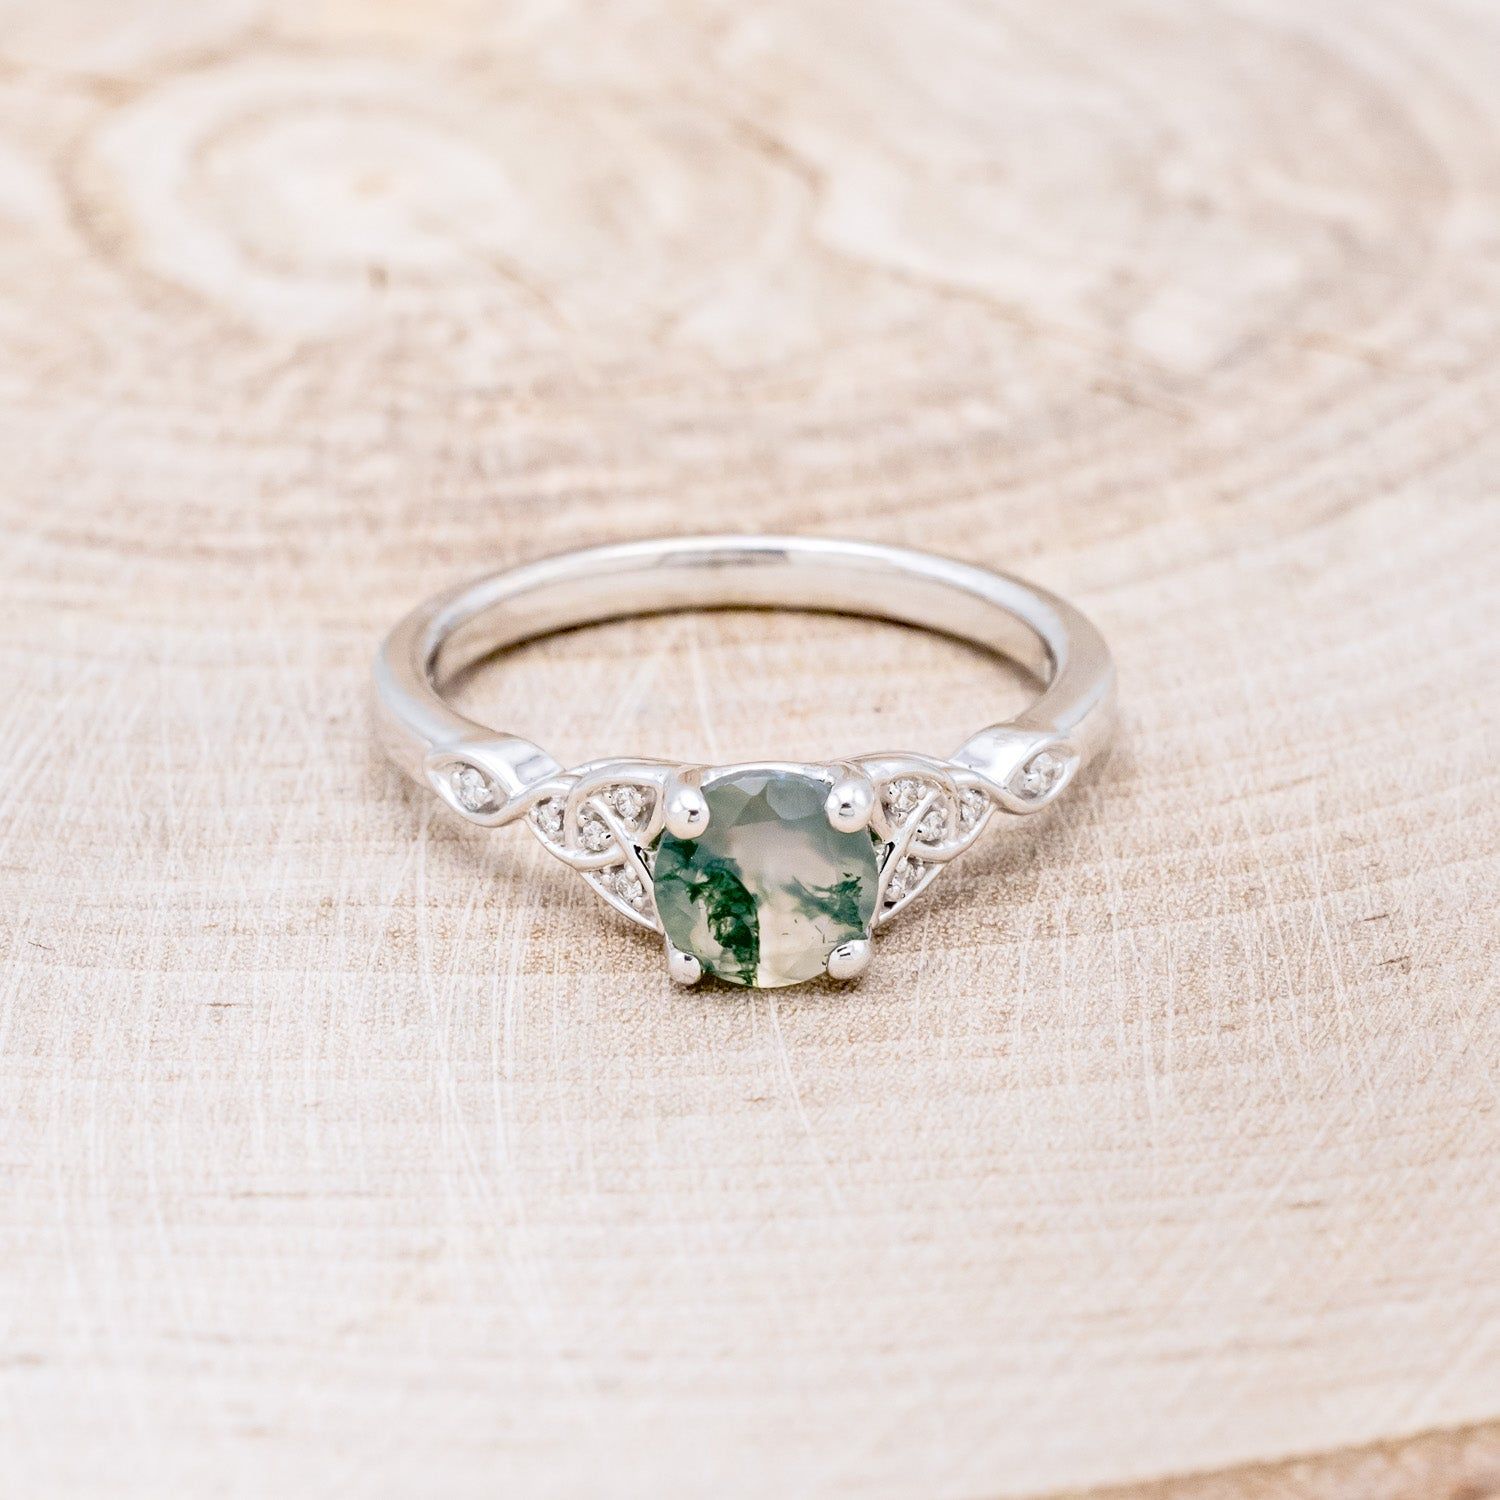 Classic and beautiful celtic engagement rings